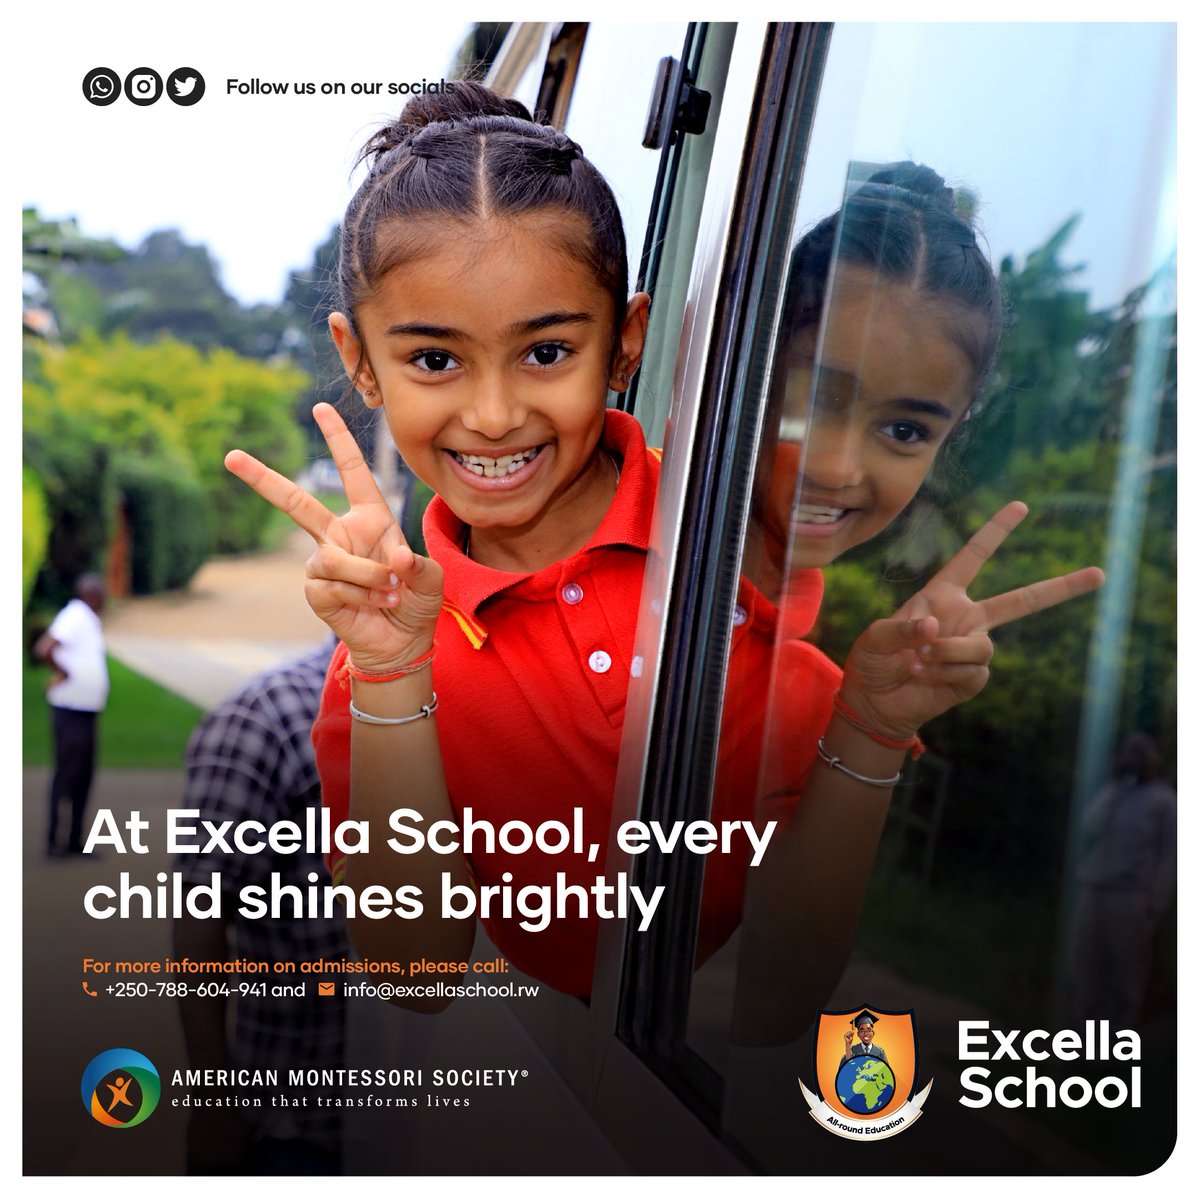 Discover inclusivity at #ExcellaSchool, celebrating each child's uniqueness. Our moto 'In pursuit of a balanced education' reflects our commitment to nurturing well-rounded individuals. #balancededucation